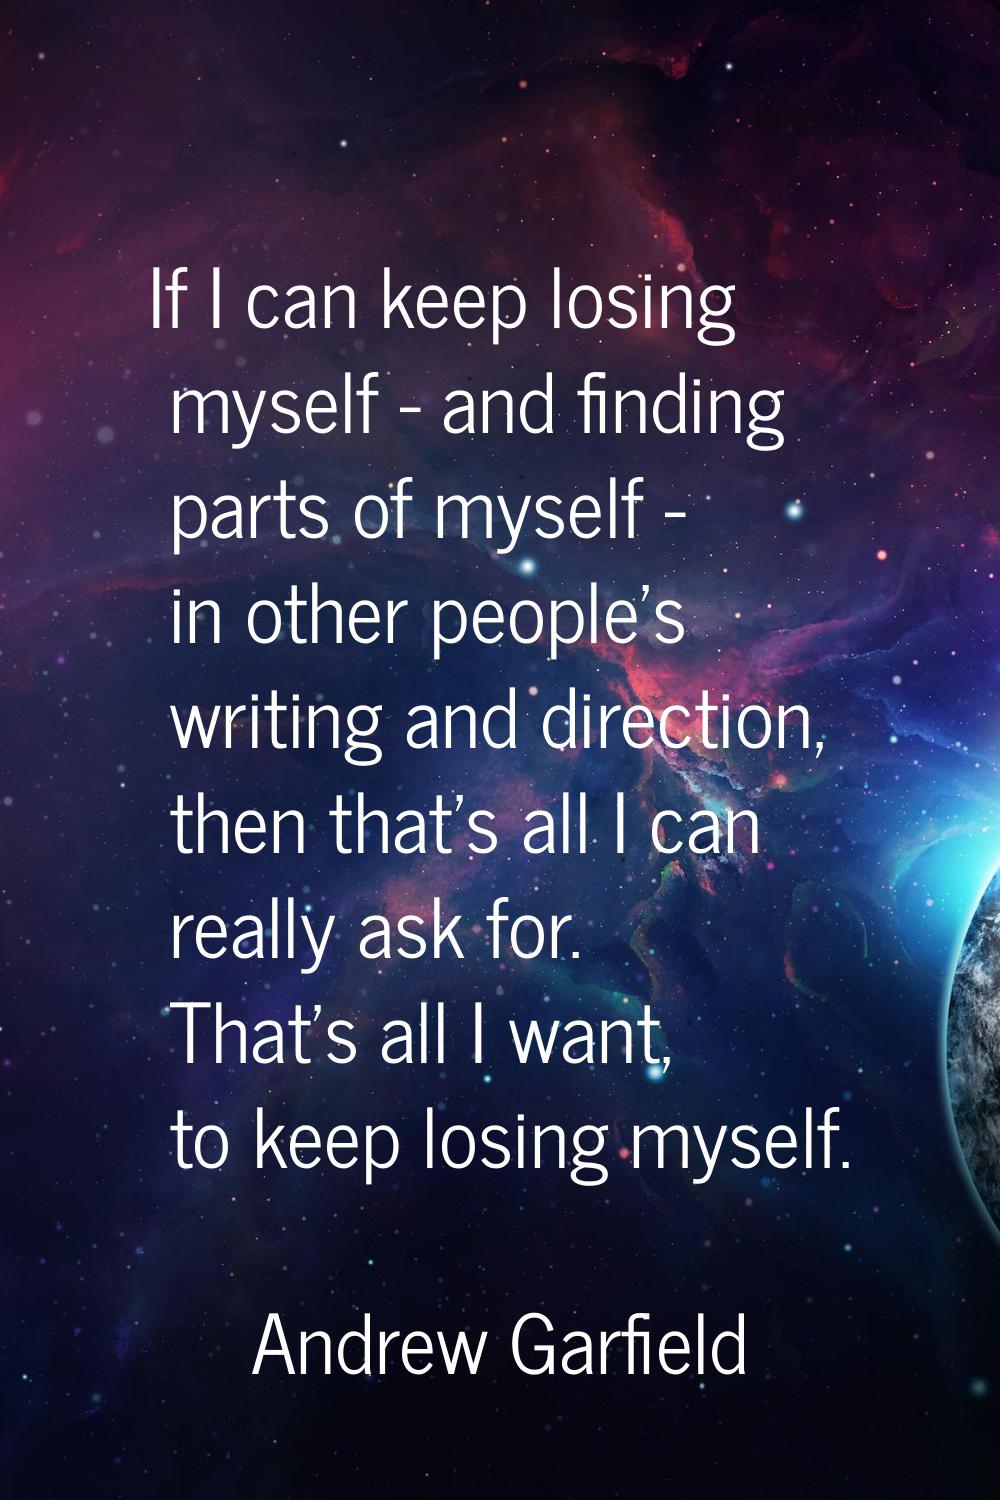 If I can keep losing myself - and finding parts of myself - in other people's writing and direction